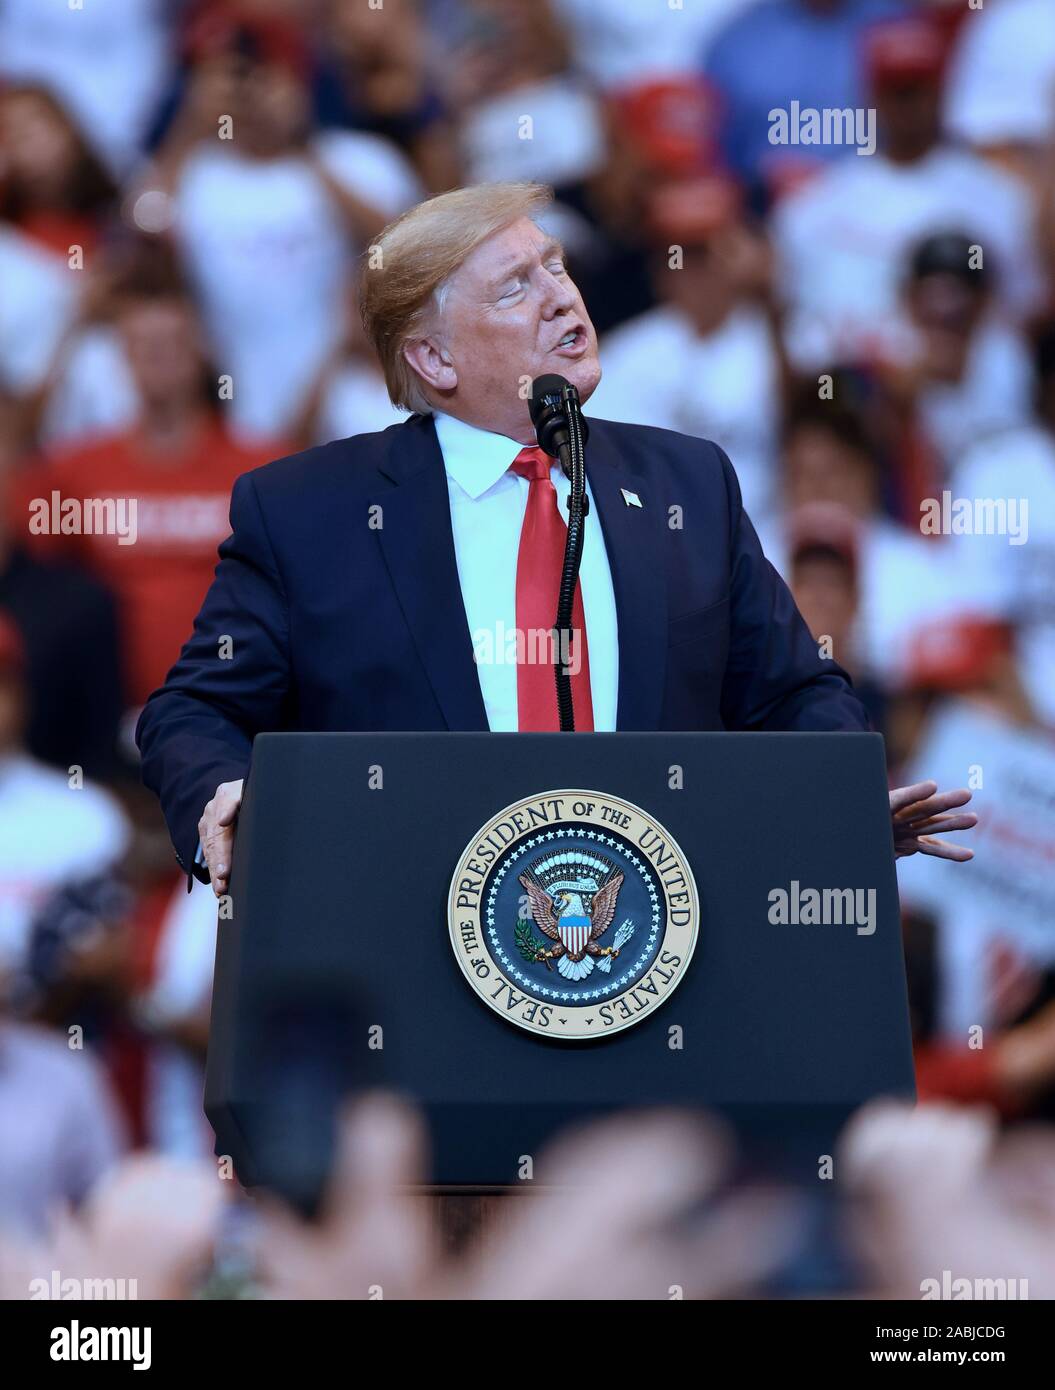 Sunrise, Florida, USA. 26th Nov, 2019. U.S. President Donald Trump speaks at a 'Florida Homecoming' rally at the BB&T Center on November 26, 2019 in Sunrise, Florida. Trump recently became an official resident of the state of Florida. Credit: Paul Hennessy/Alamy Live News Stock Photo